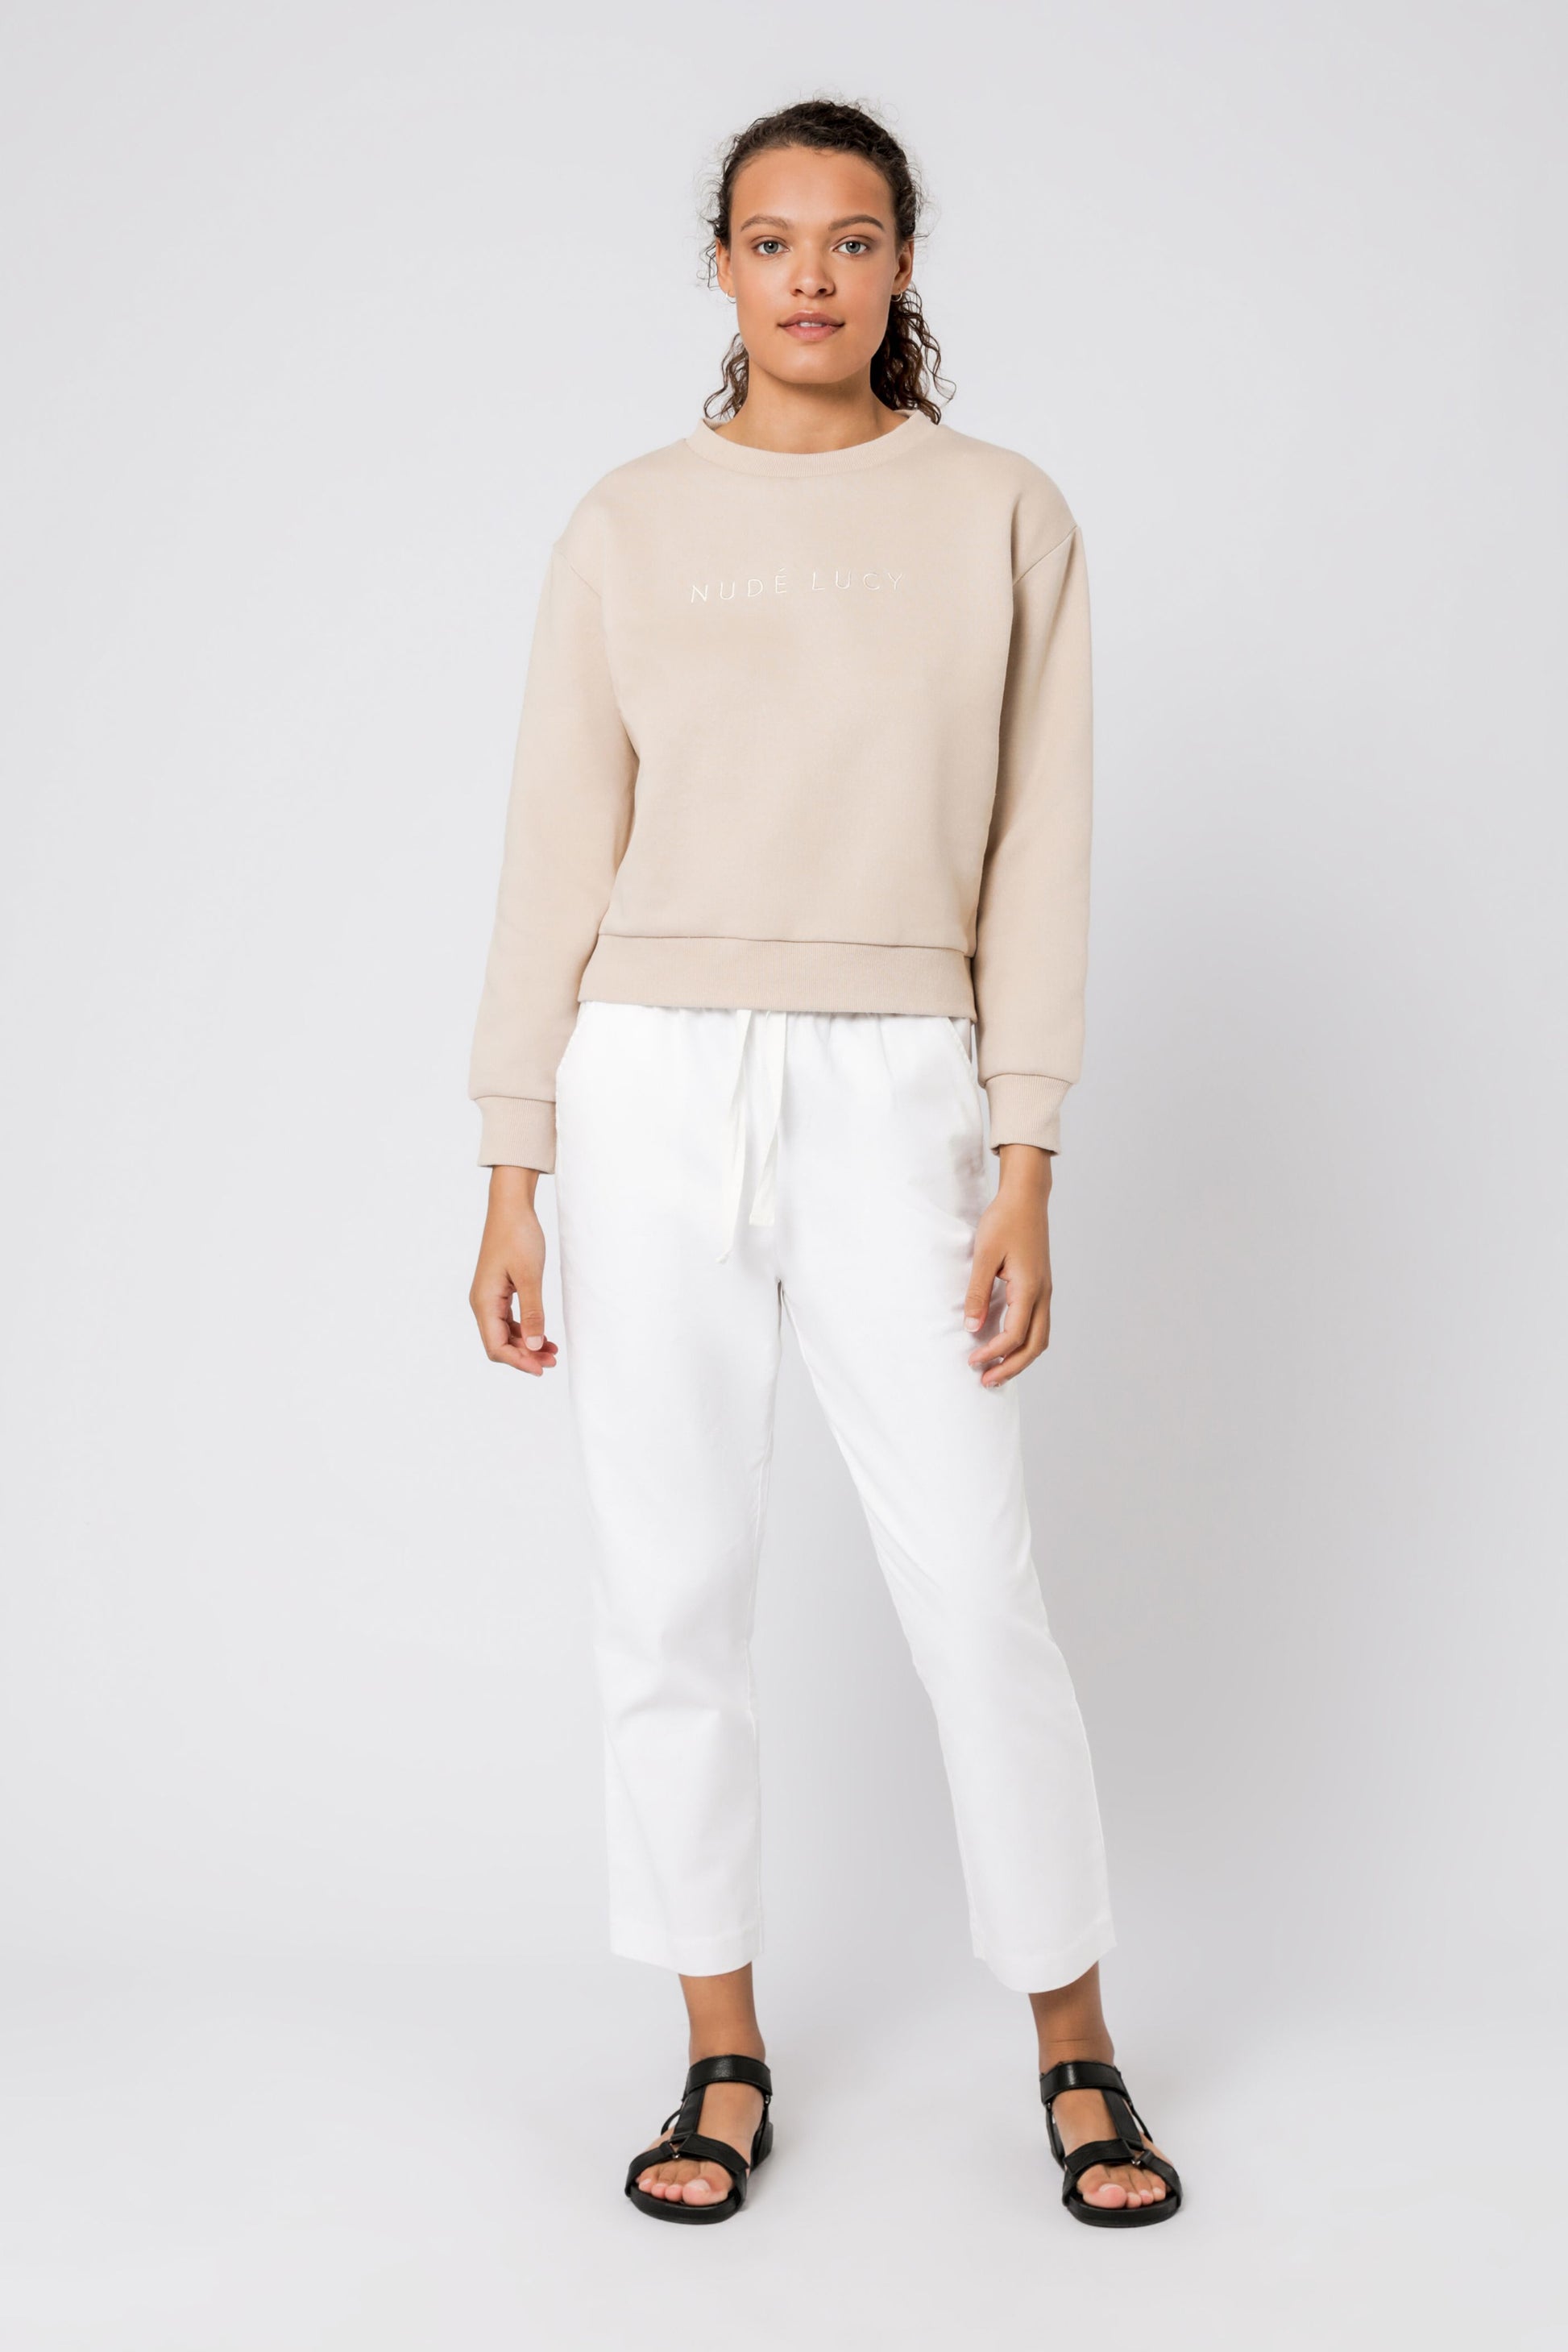 Nude Lucy Nude Lucy embr slogan sweat sand sweats